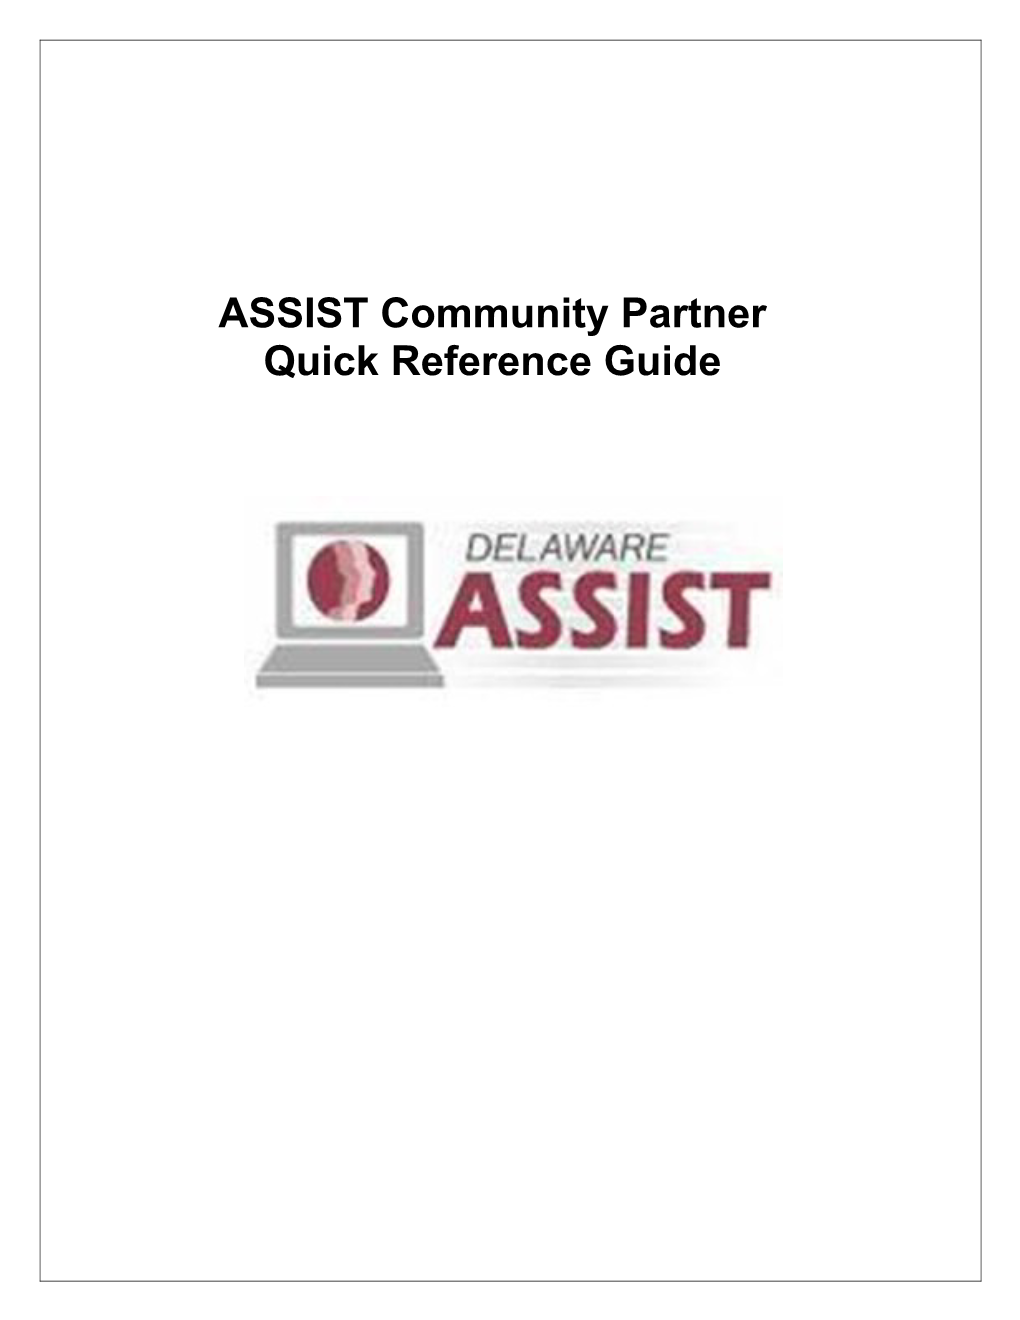 ASSIST Community Partner Quick Reference Guide